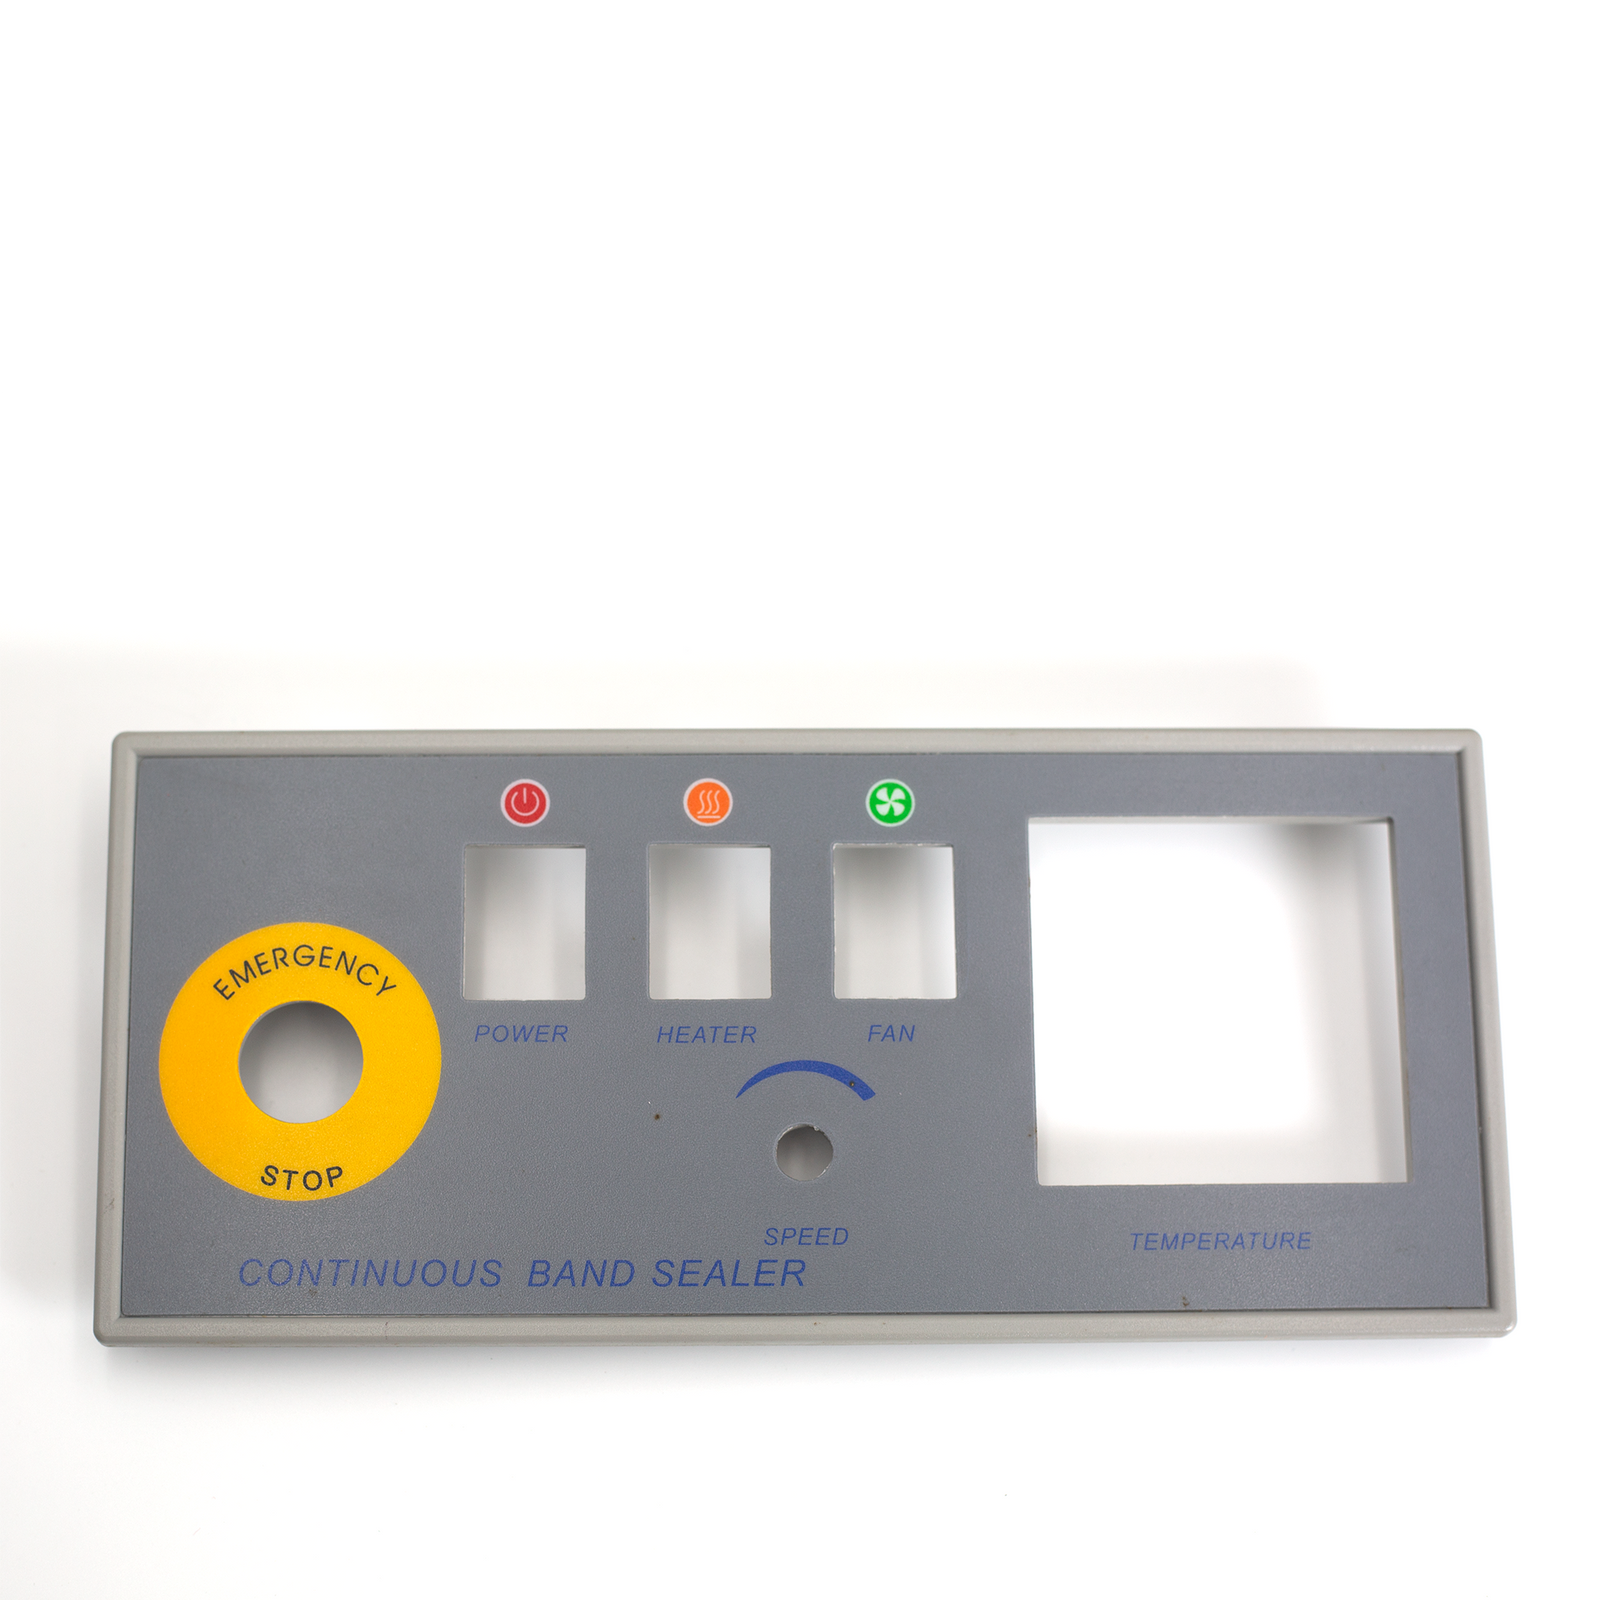 Complete plastic panel with decal for Continuous band sealers